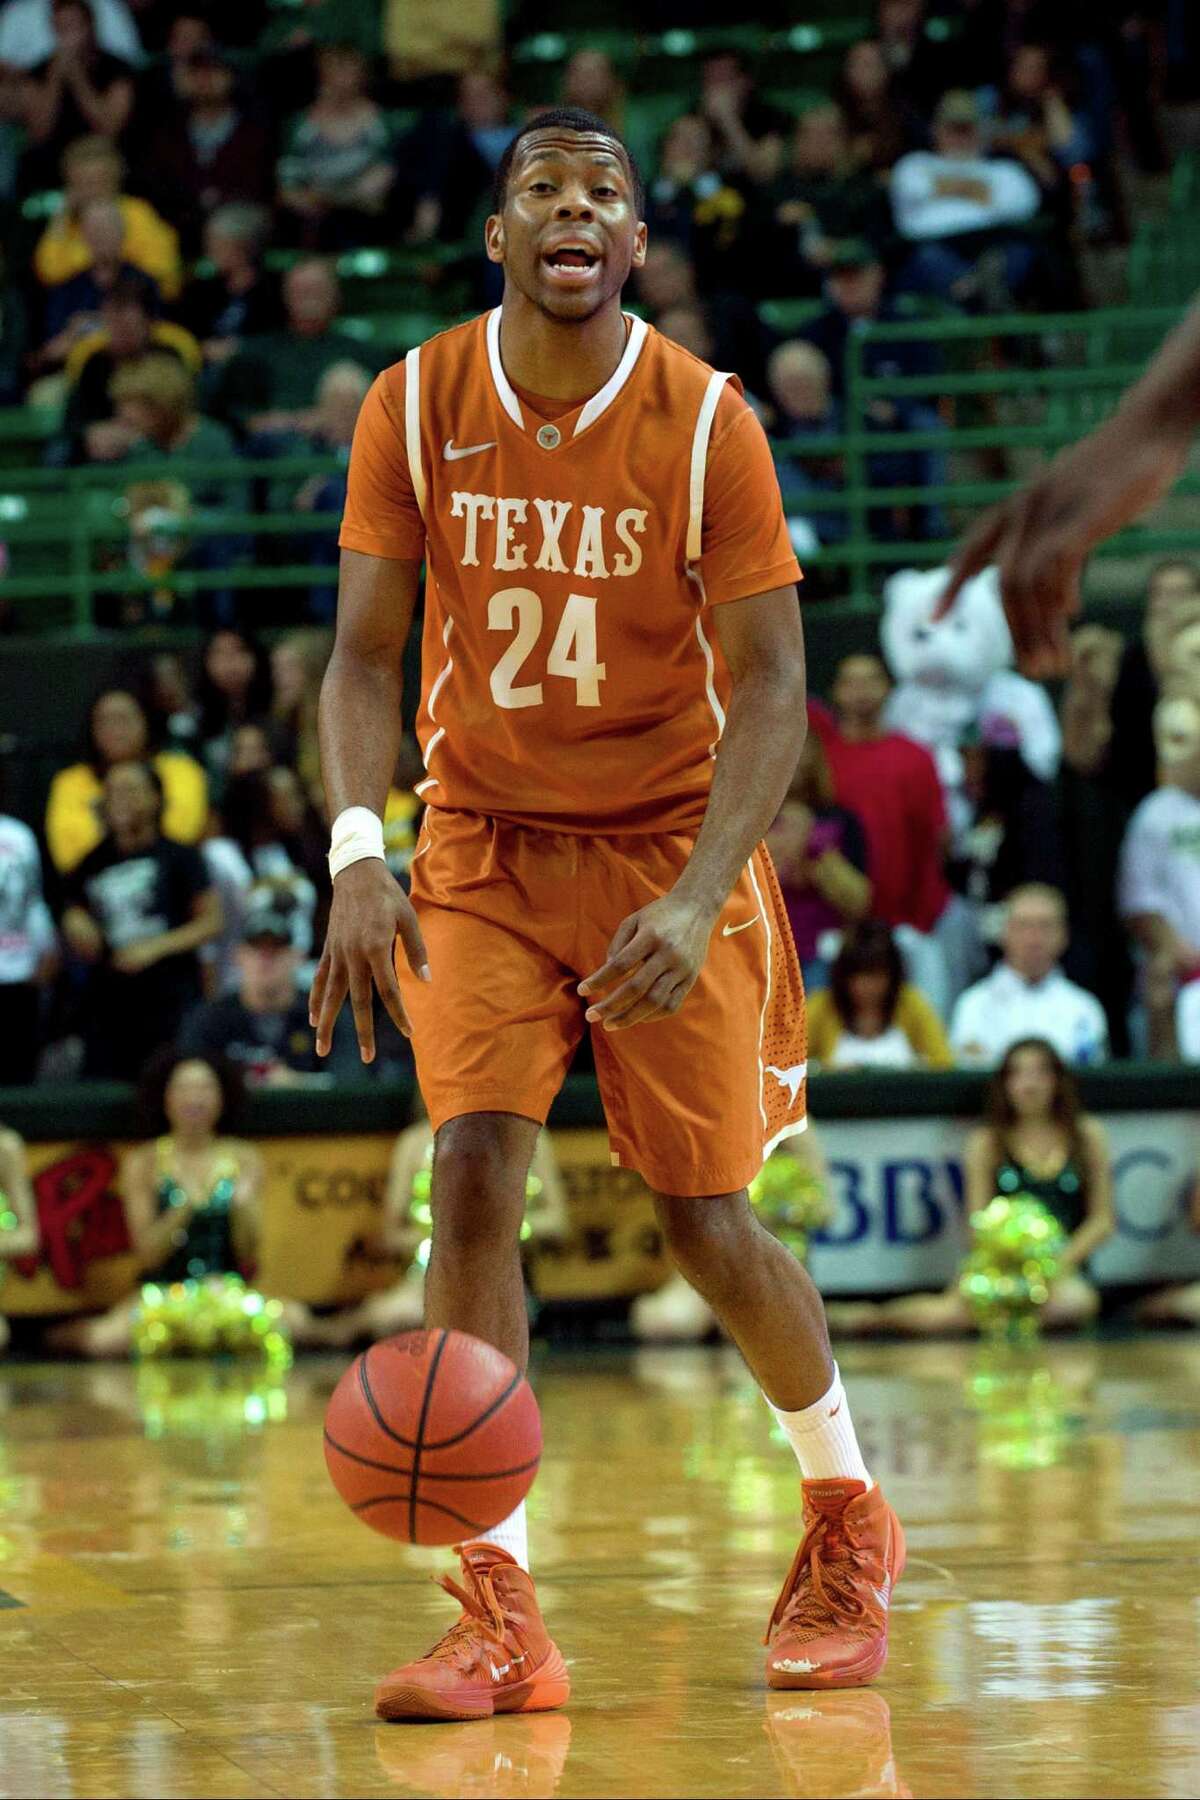 Martez Walker of the Texas Longhorns brings the ball up court against the Baylor Bears on Jan. 25, 2014 at the Ferrell Center in Waco.